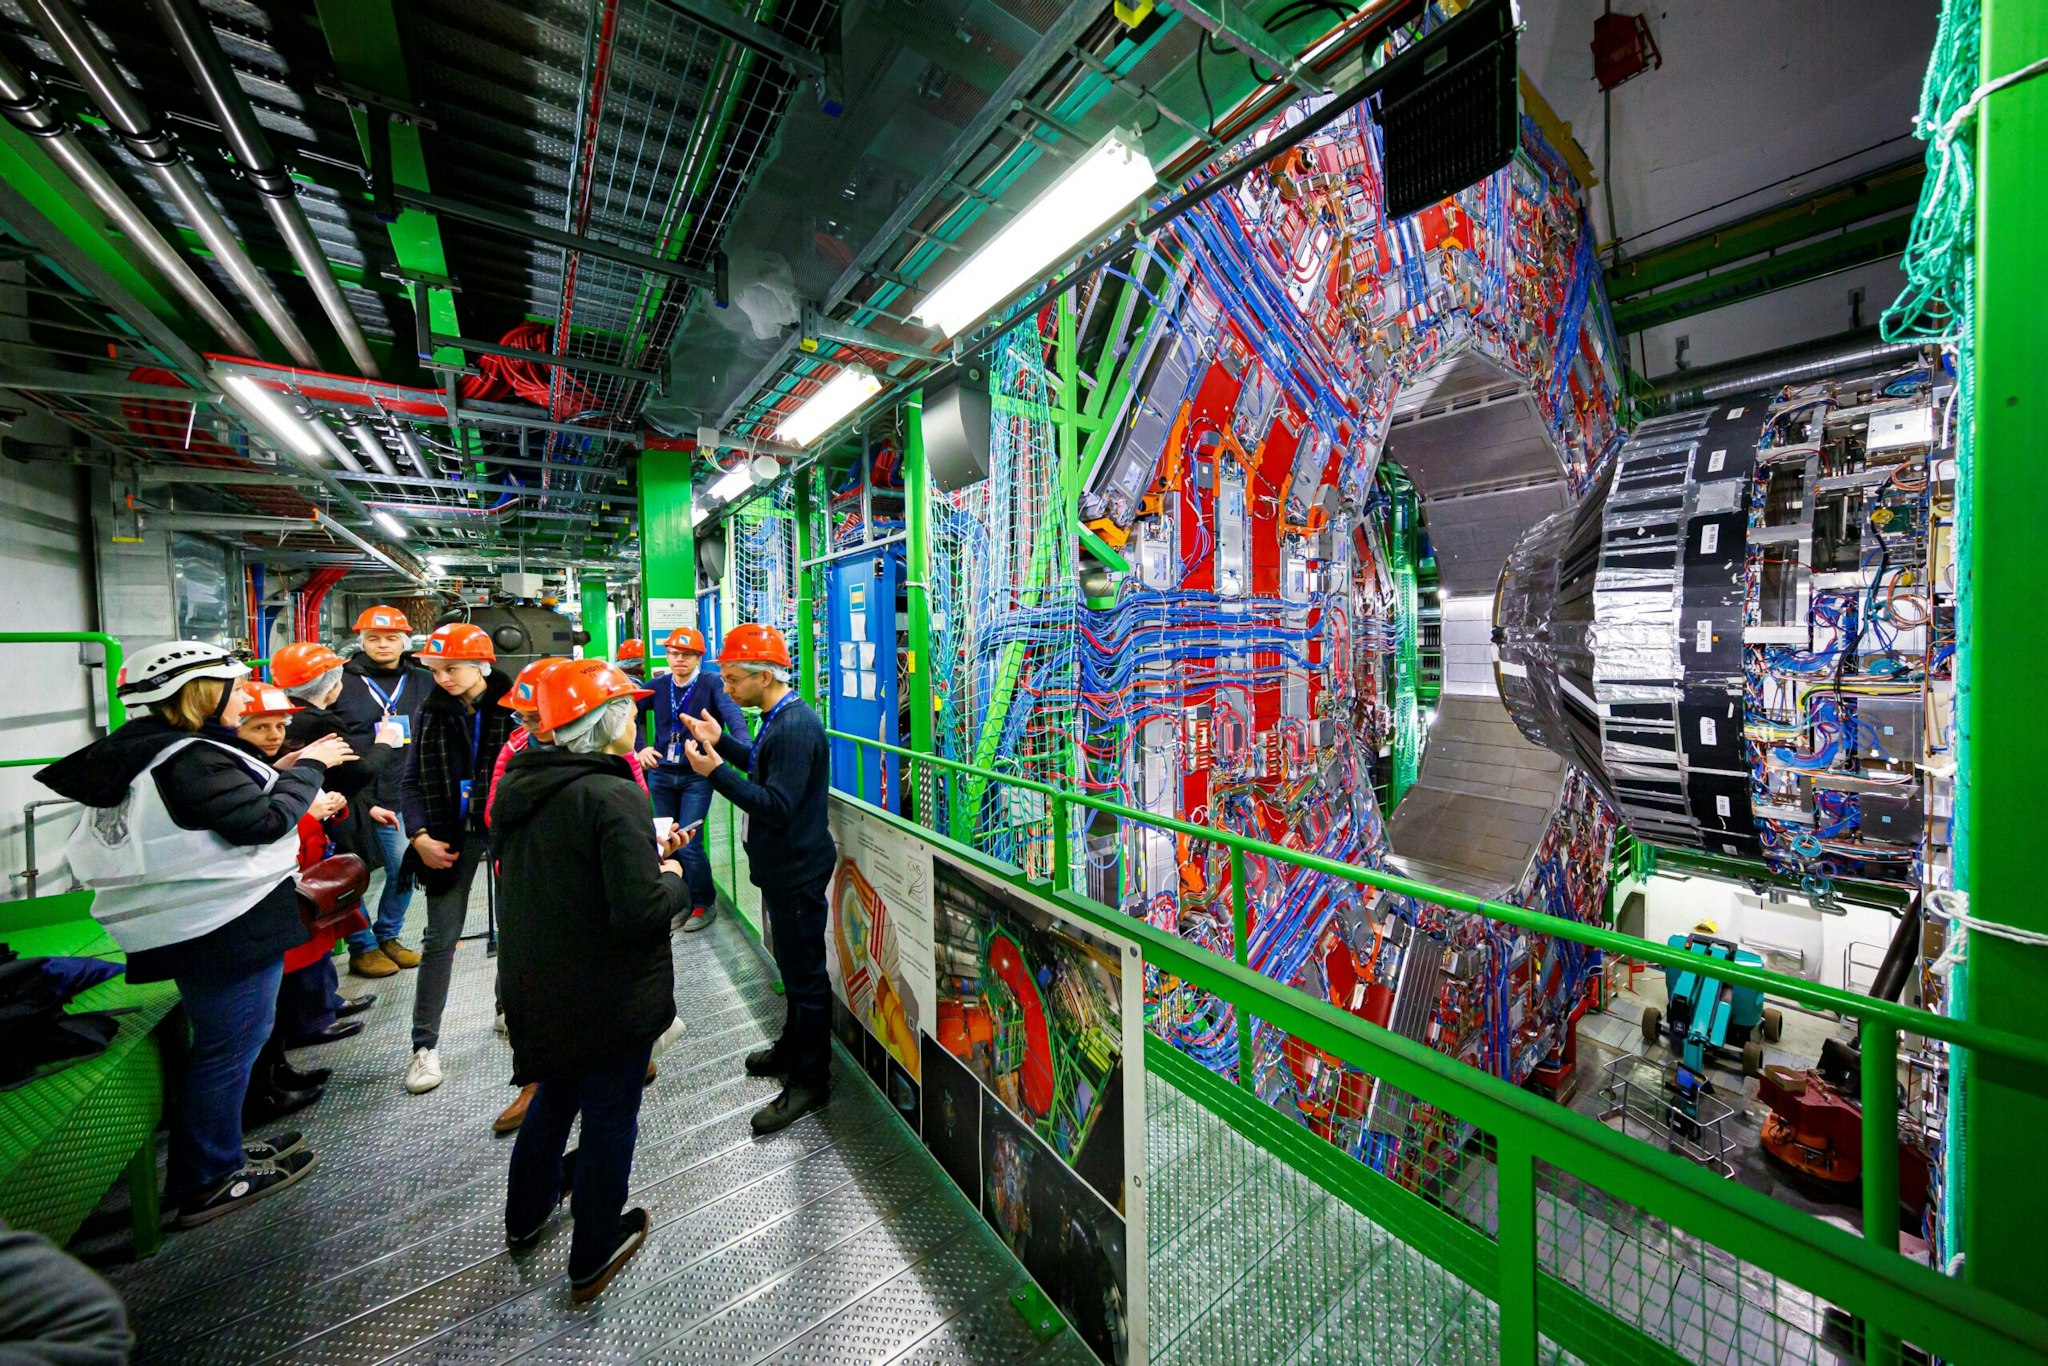 CERN is about to fire up the Large Hadron Collider